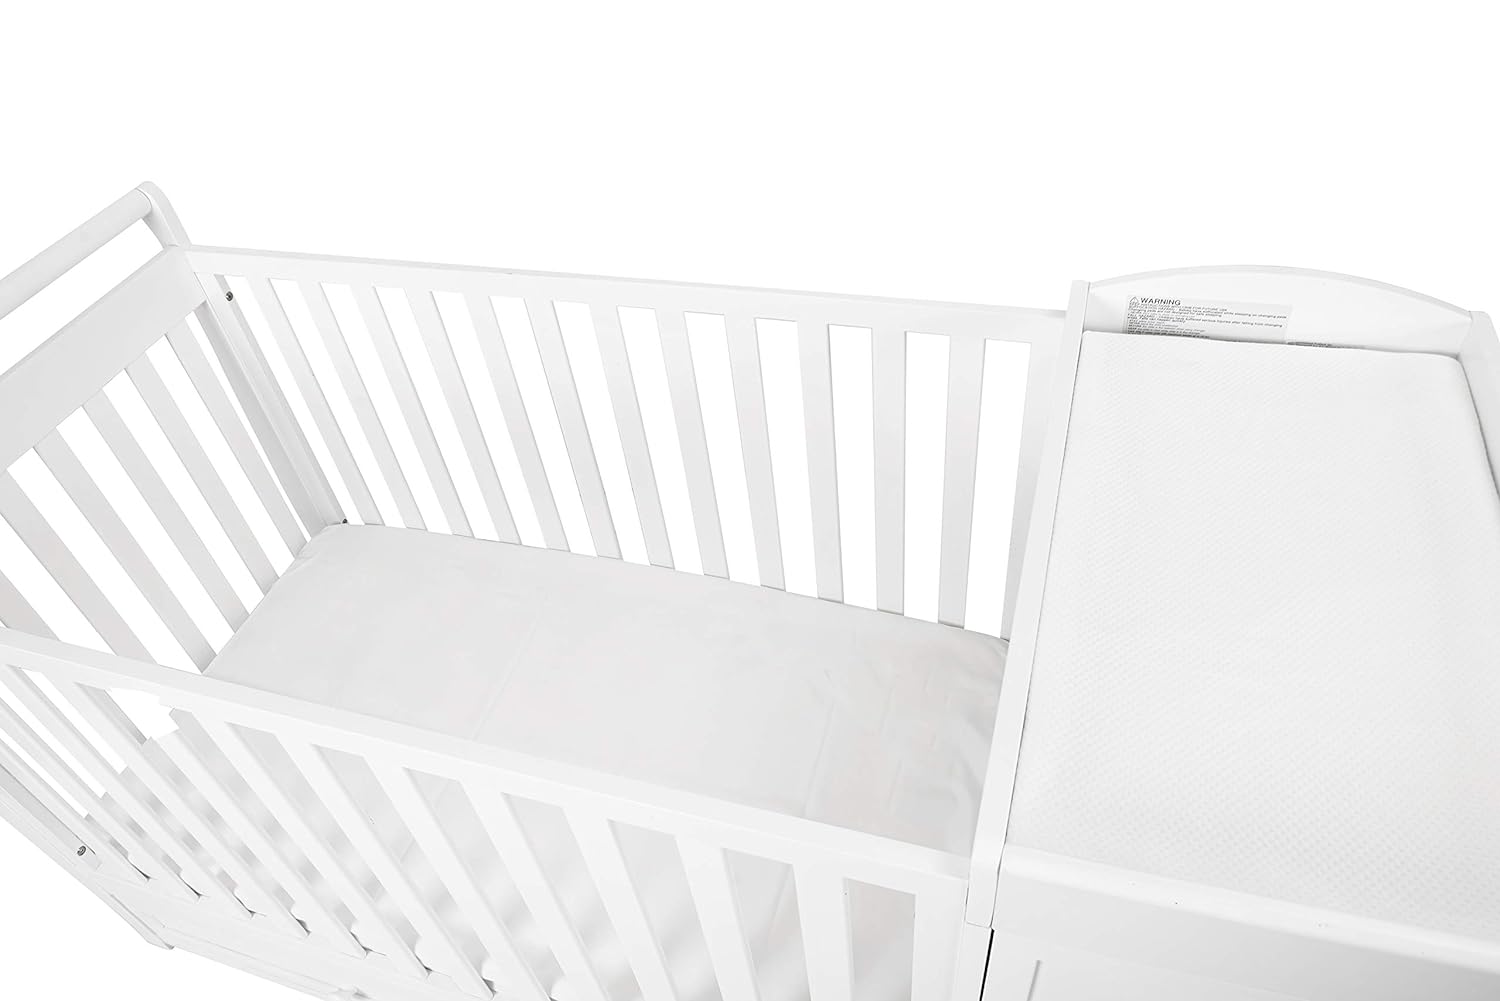 AFG Daphne 3 in 1 Crib and Changer Combo White